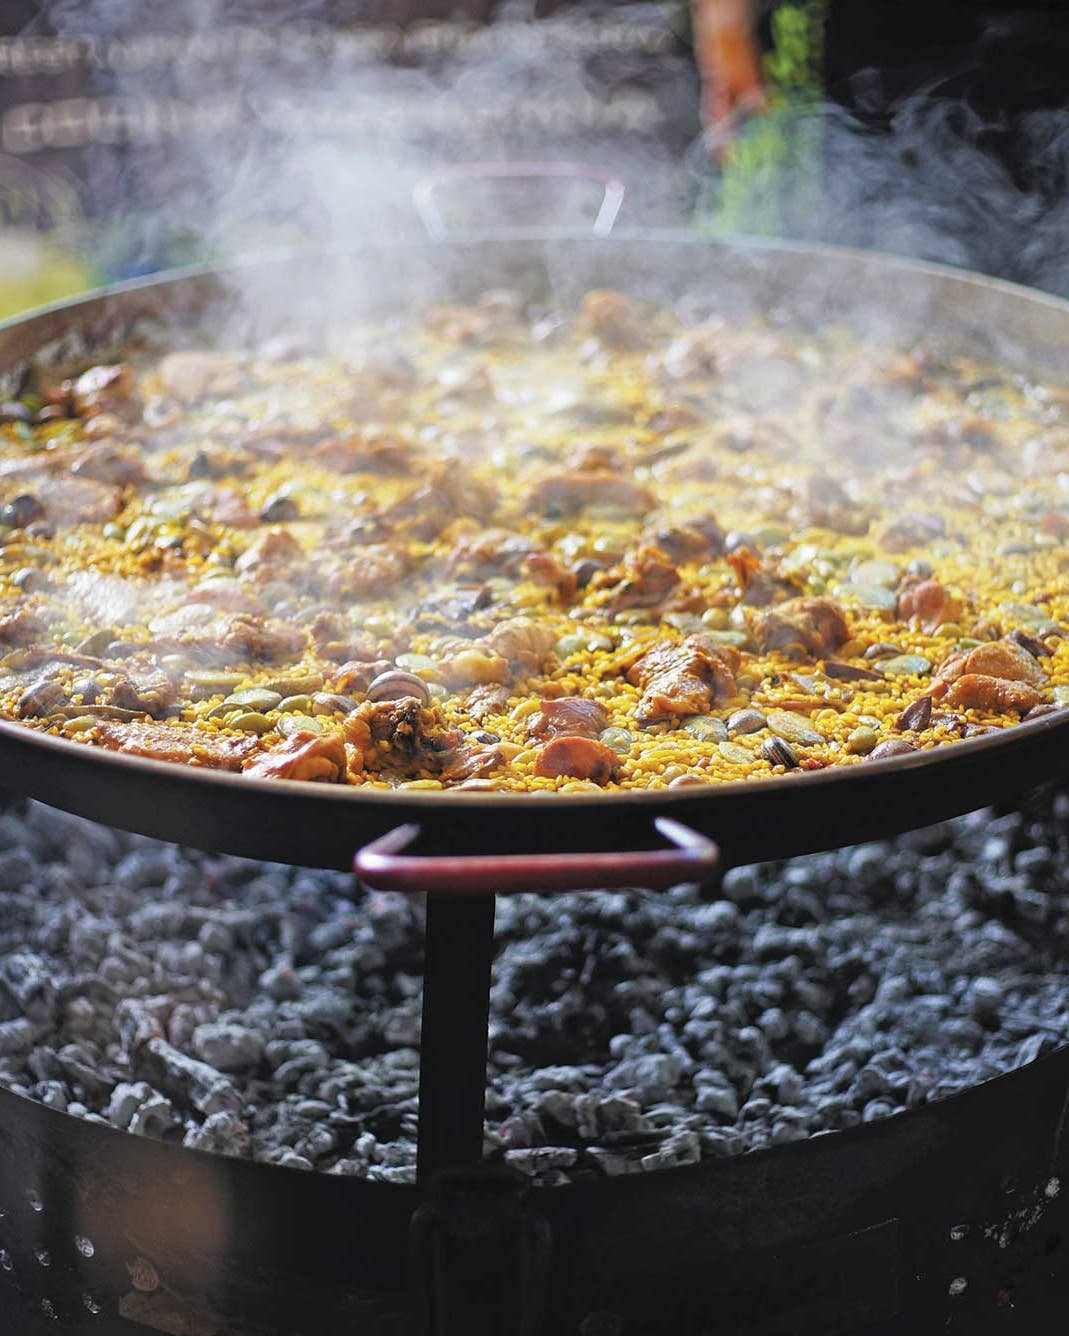 “You’re Not Going to Find a Paella Like This in a Restaurant”